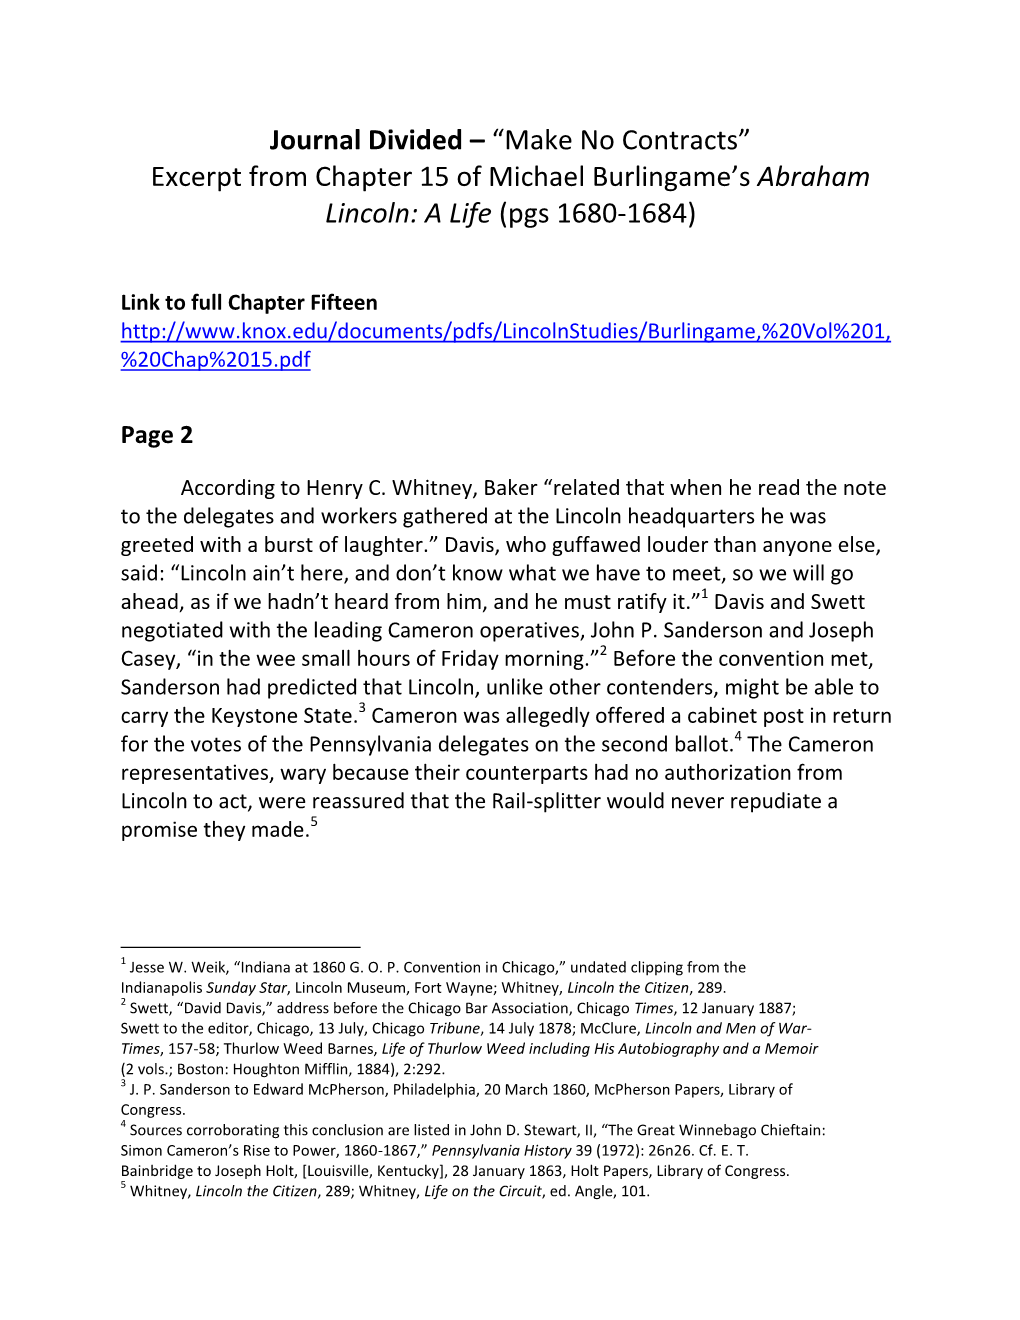 Journal Divided – “Make No Contracts” Excerpt from Chapter 15 of Michael Burlingame’S Abraham Lincoln: a Life (Pgs 1680-1684)